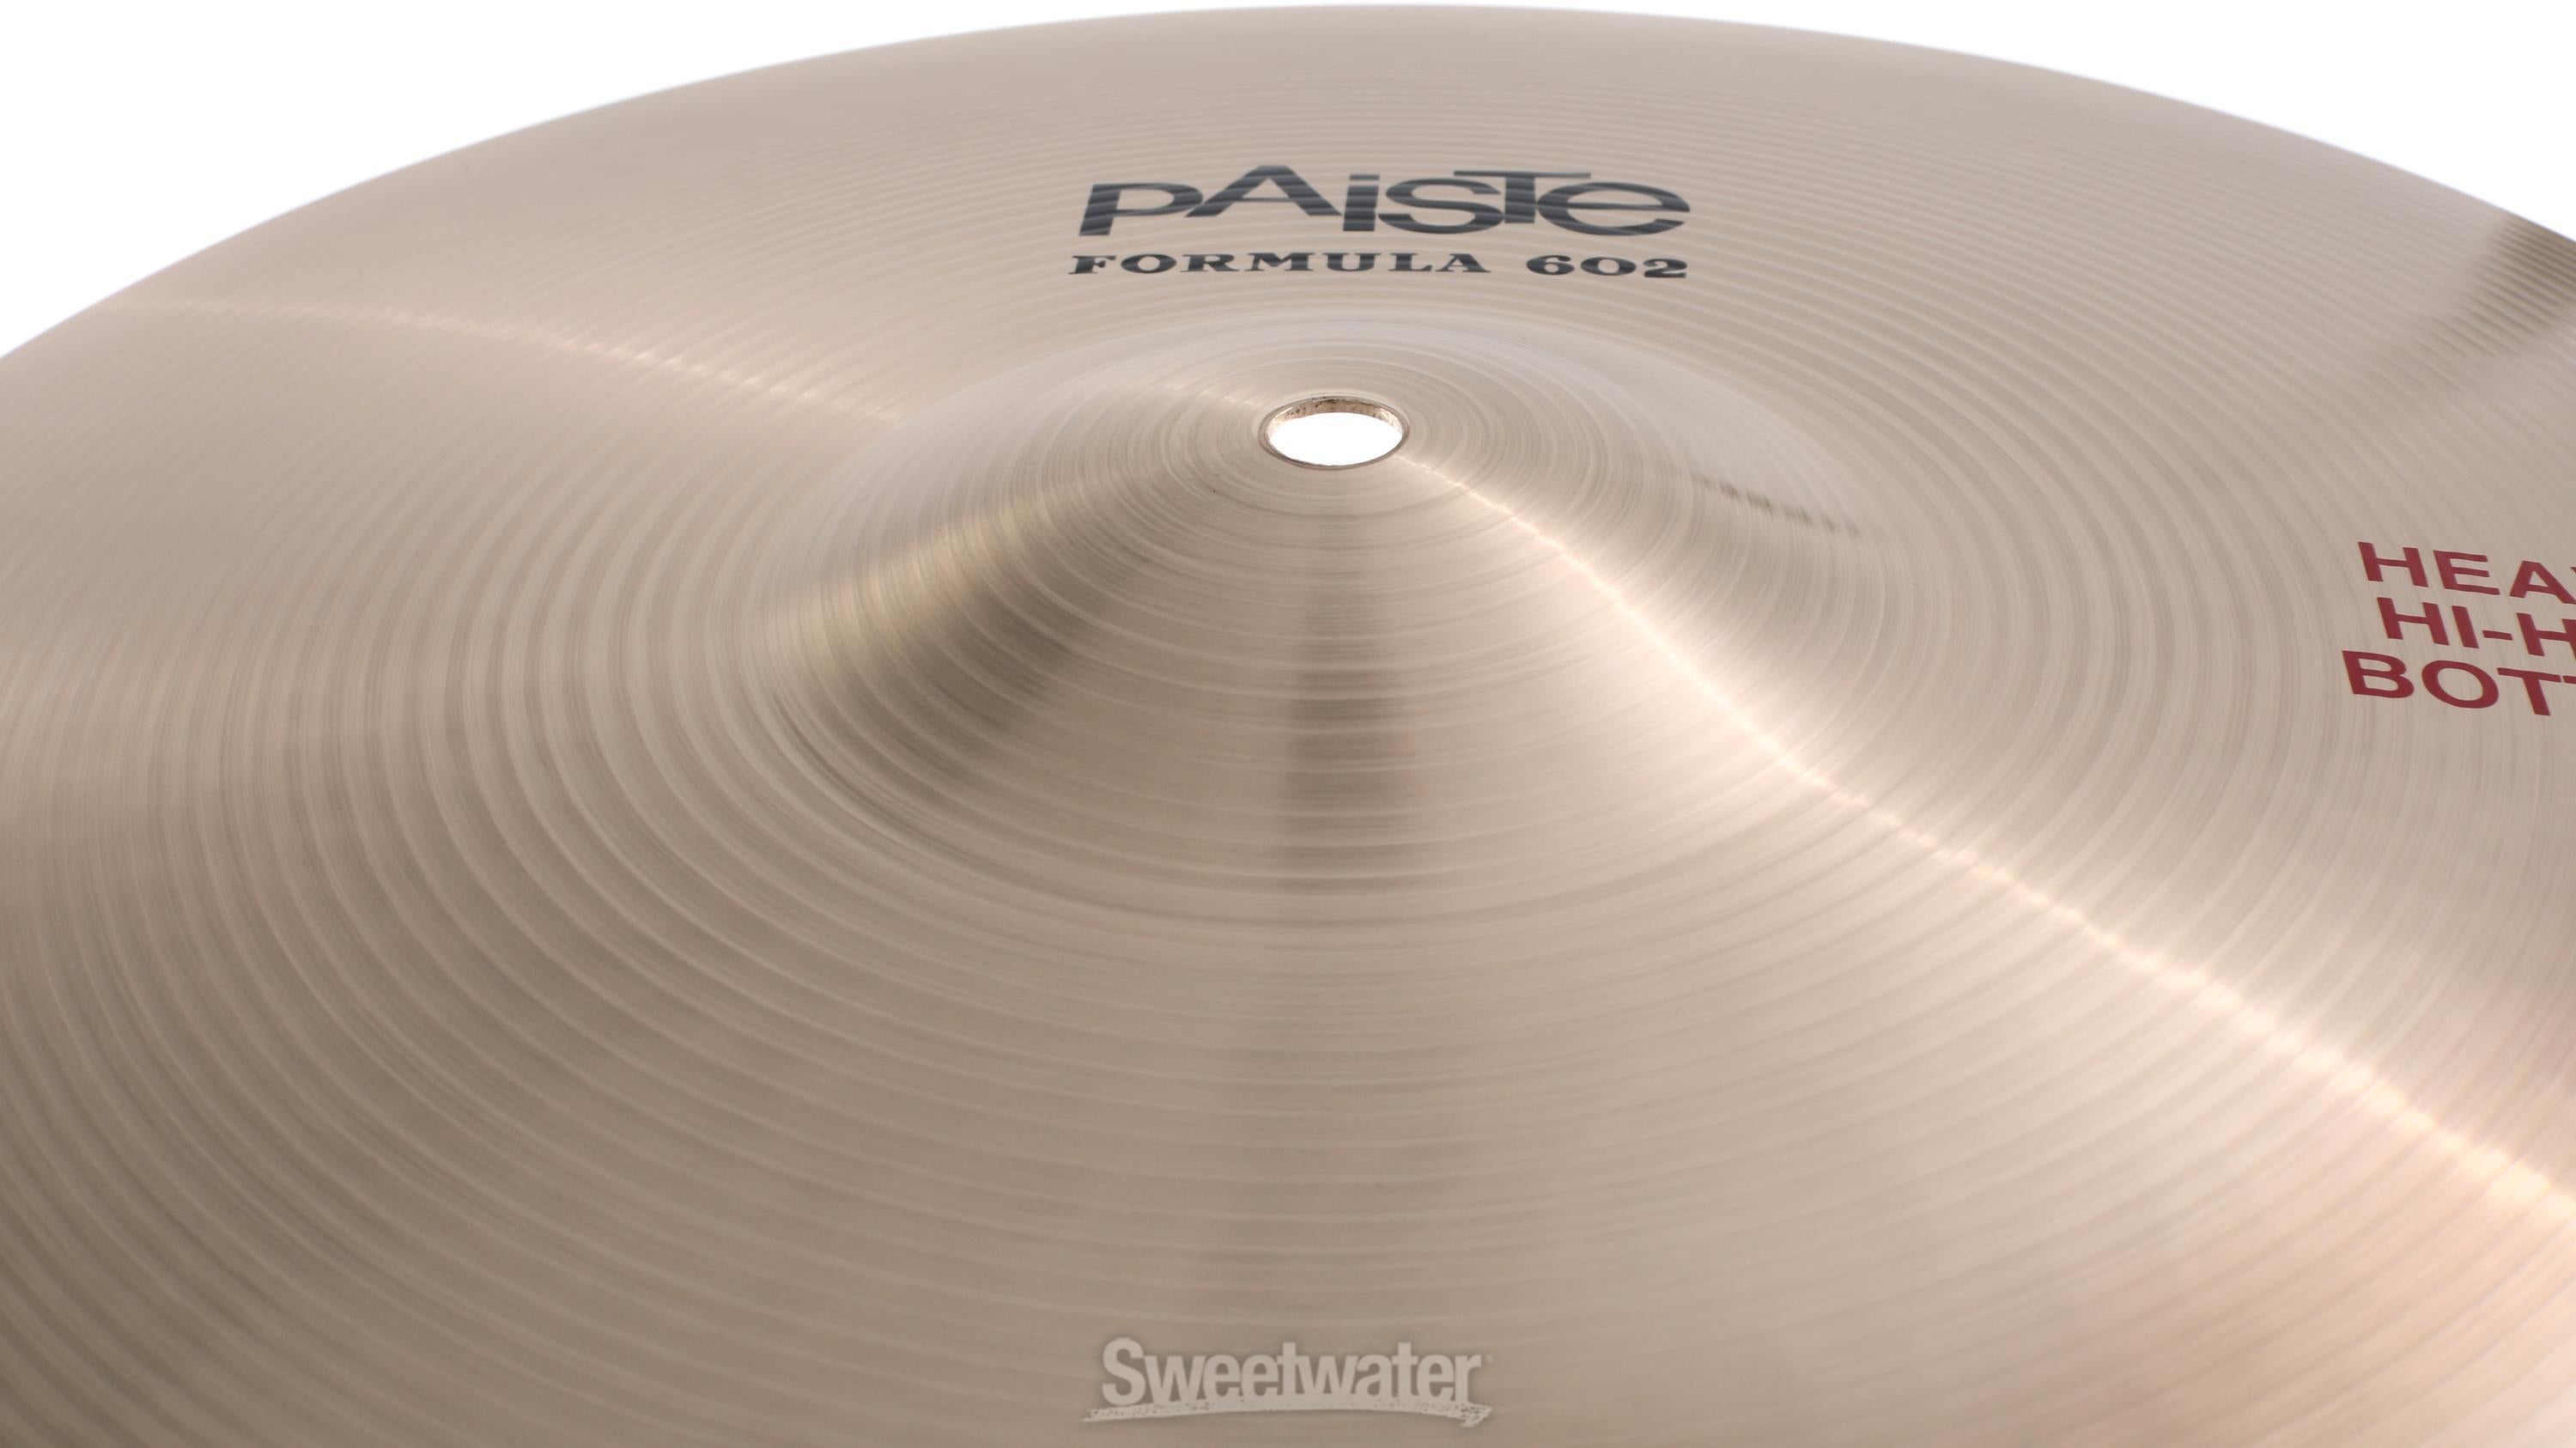 Paiste 14 inch Formula 602 Heavy Hi-hat Cymbals | Sweetwater